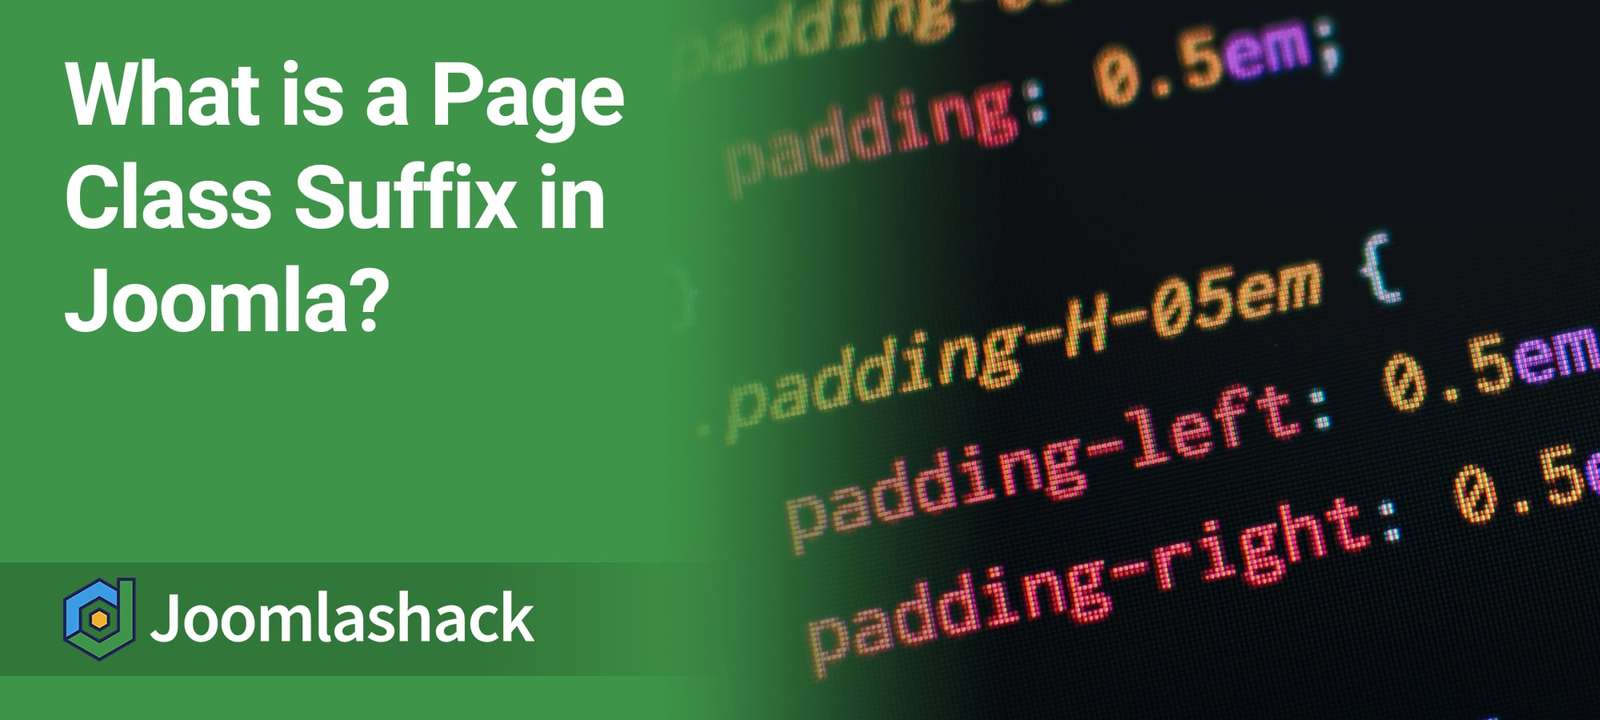 What is a Page Class Suffix in Joomla?